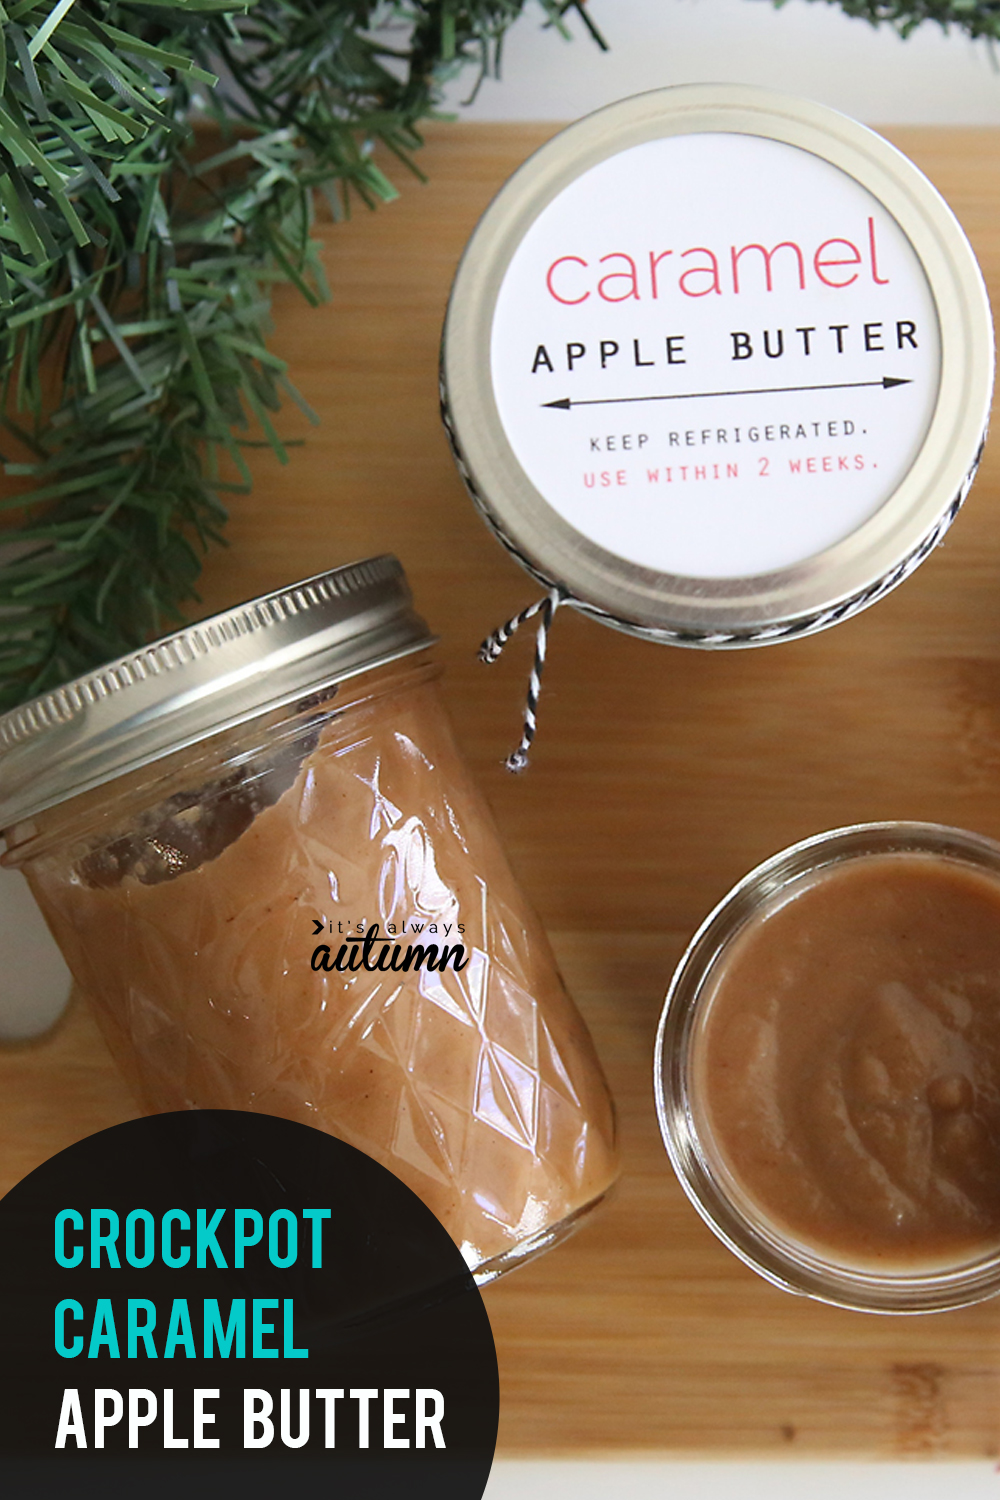 This caramel apple butter is easy to make in the crockpot and is delicious! It makes a beautiful DIY gift.